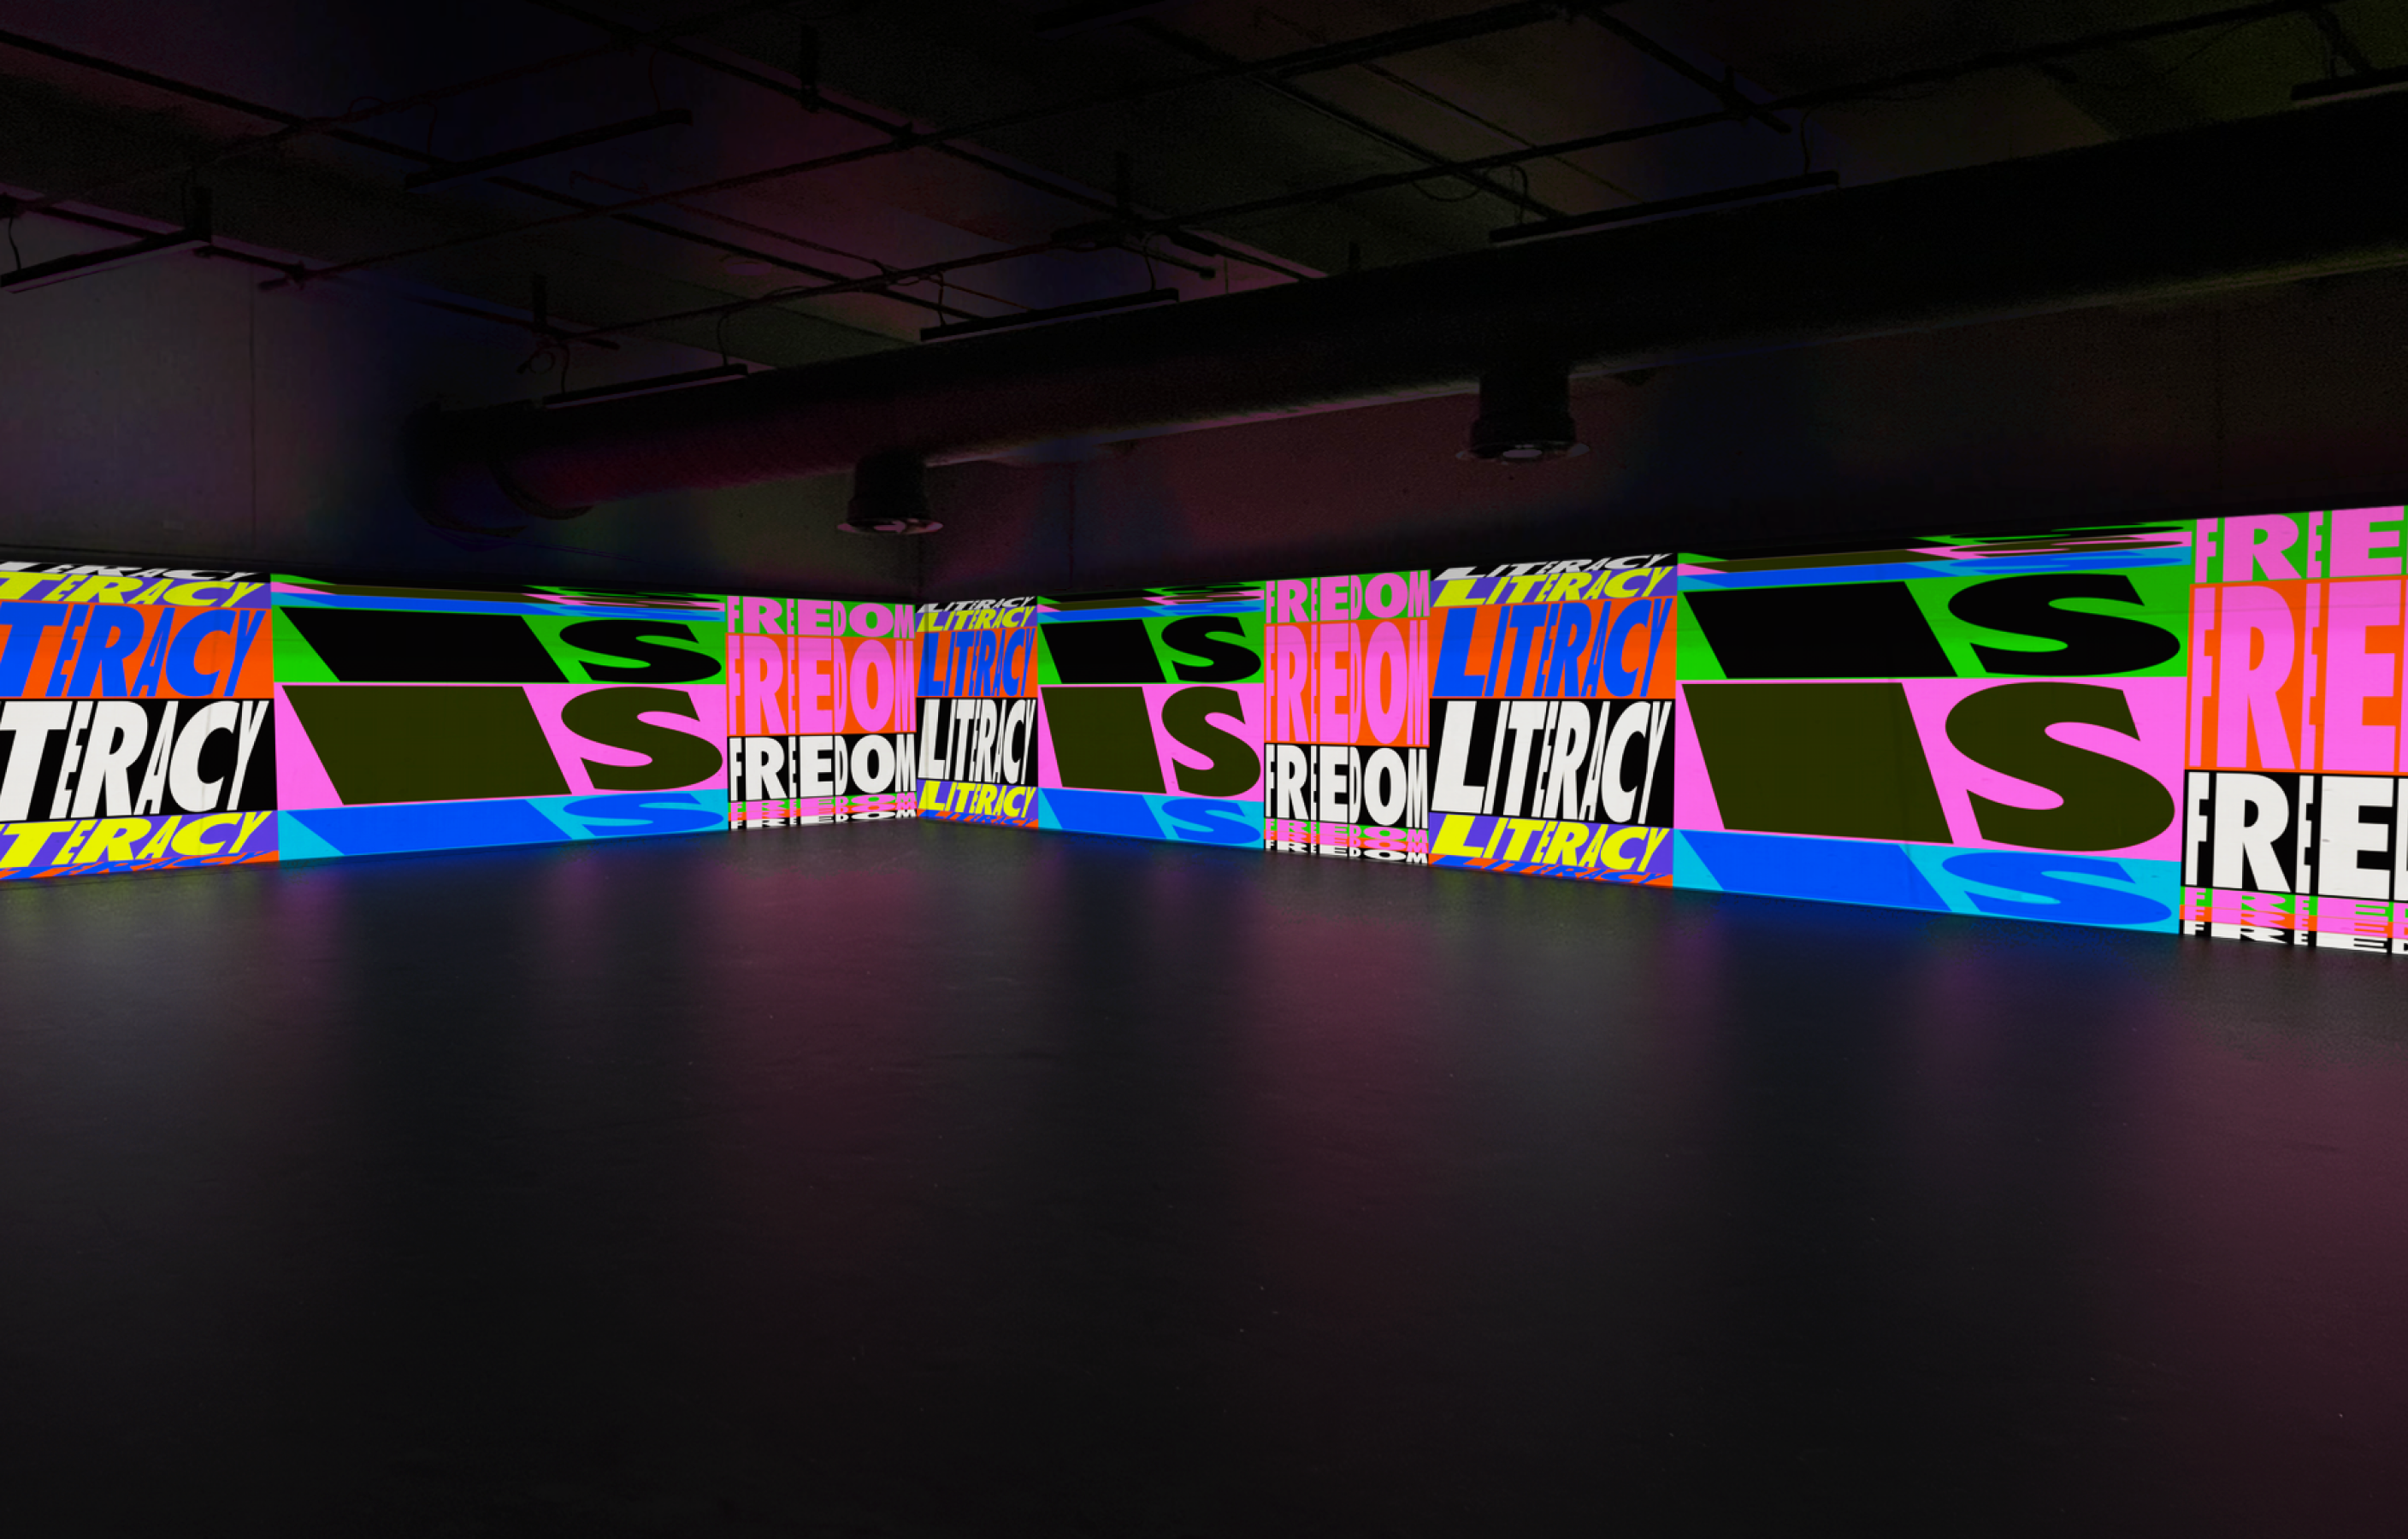 ALNF projection, three walls with colourful repeating text